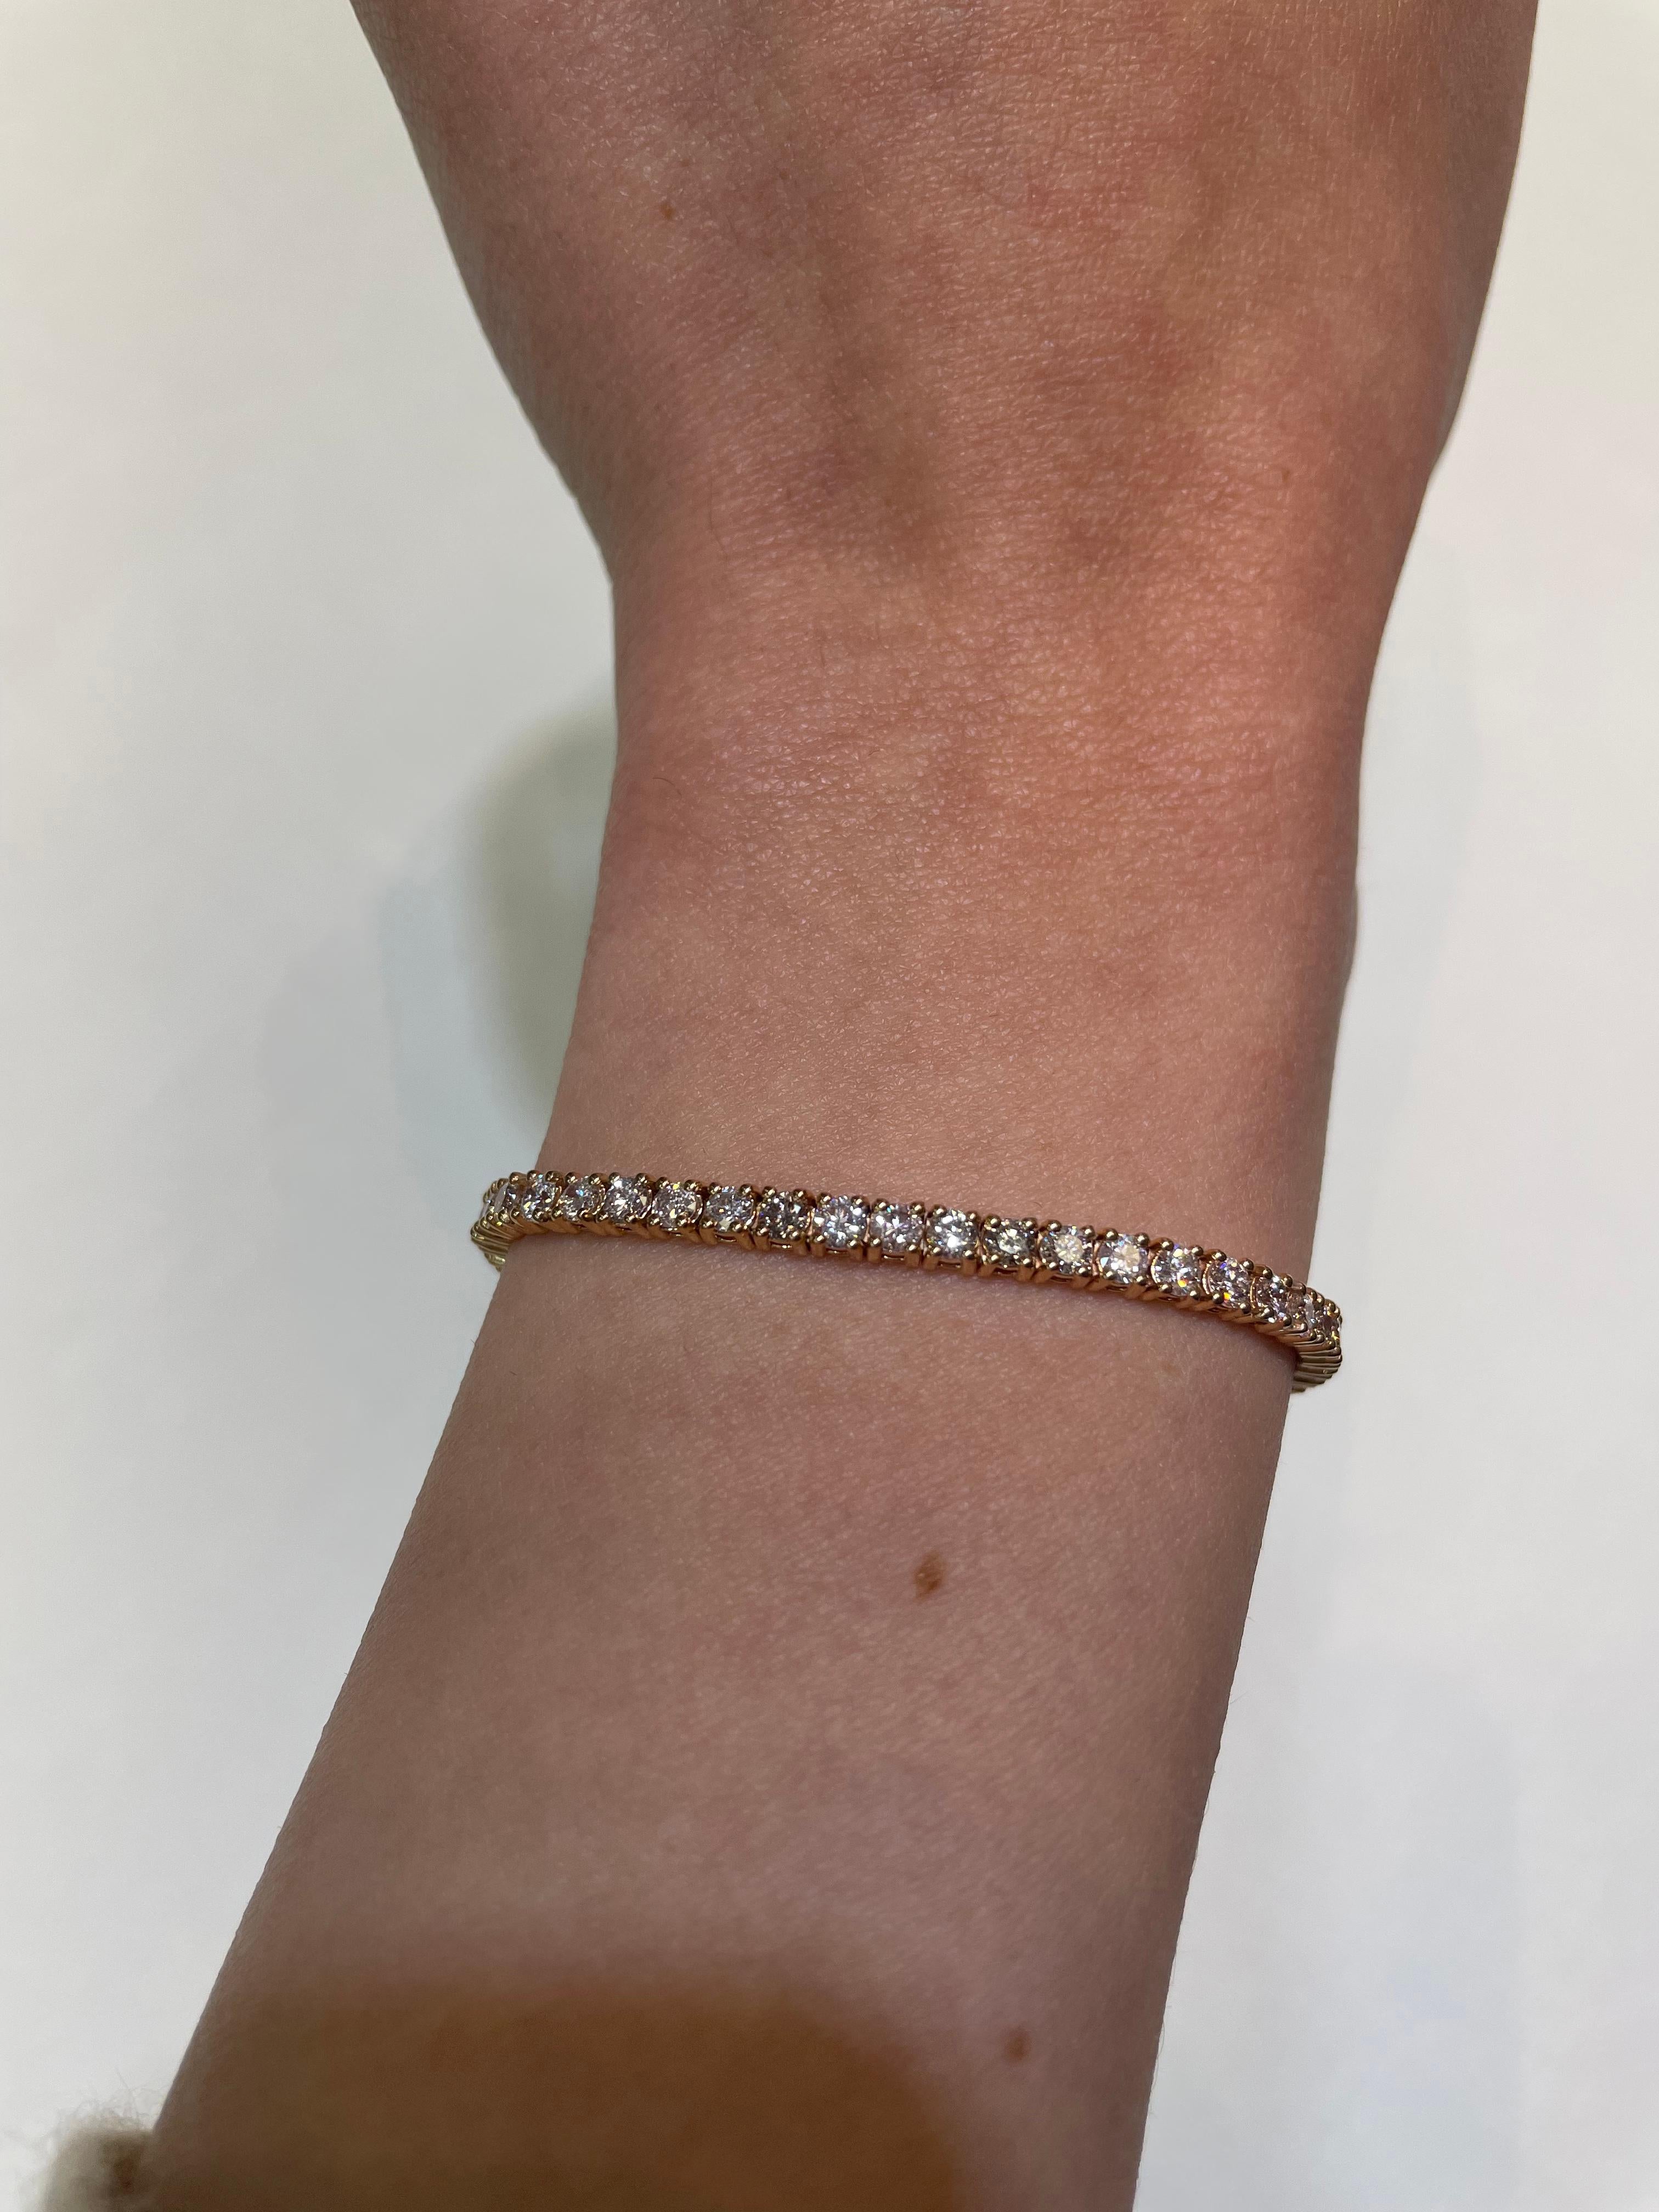 Exquisite and timeless diamonds tennis bracelet, by Alexander Beverly Hills.
60 round brilliant diamonds, 4.62 carats total. Approximately Very Light Pink color (looks like regular white diamonds in mounting) and SI clarity. Four prong set in 14k